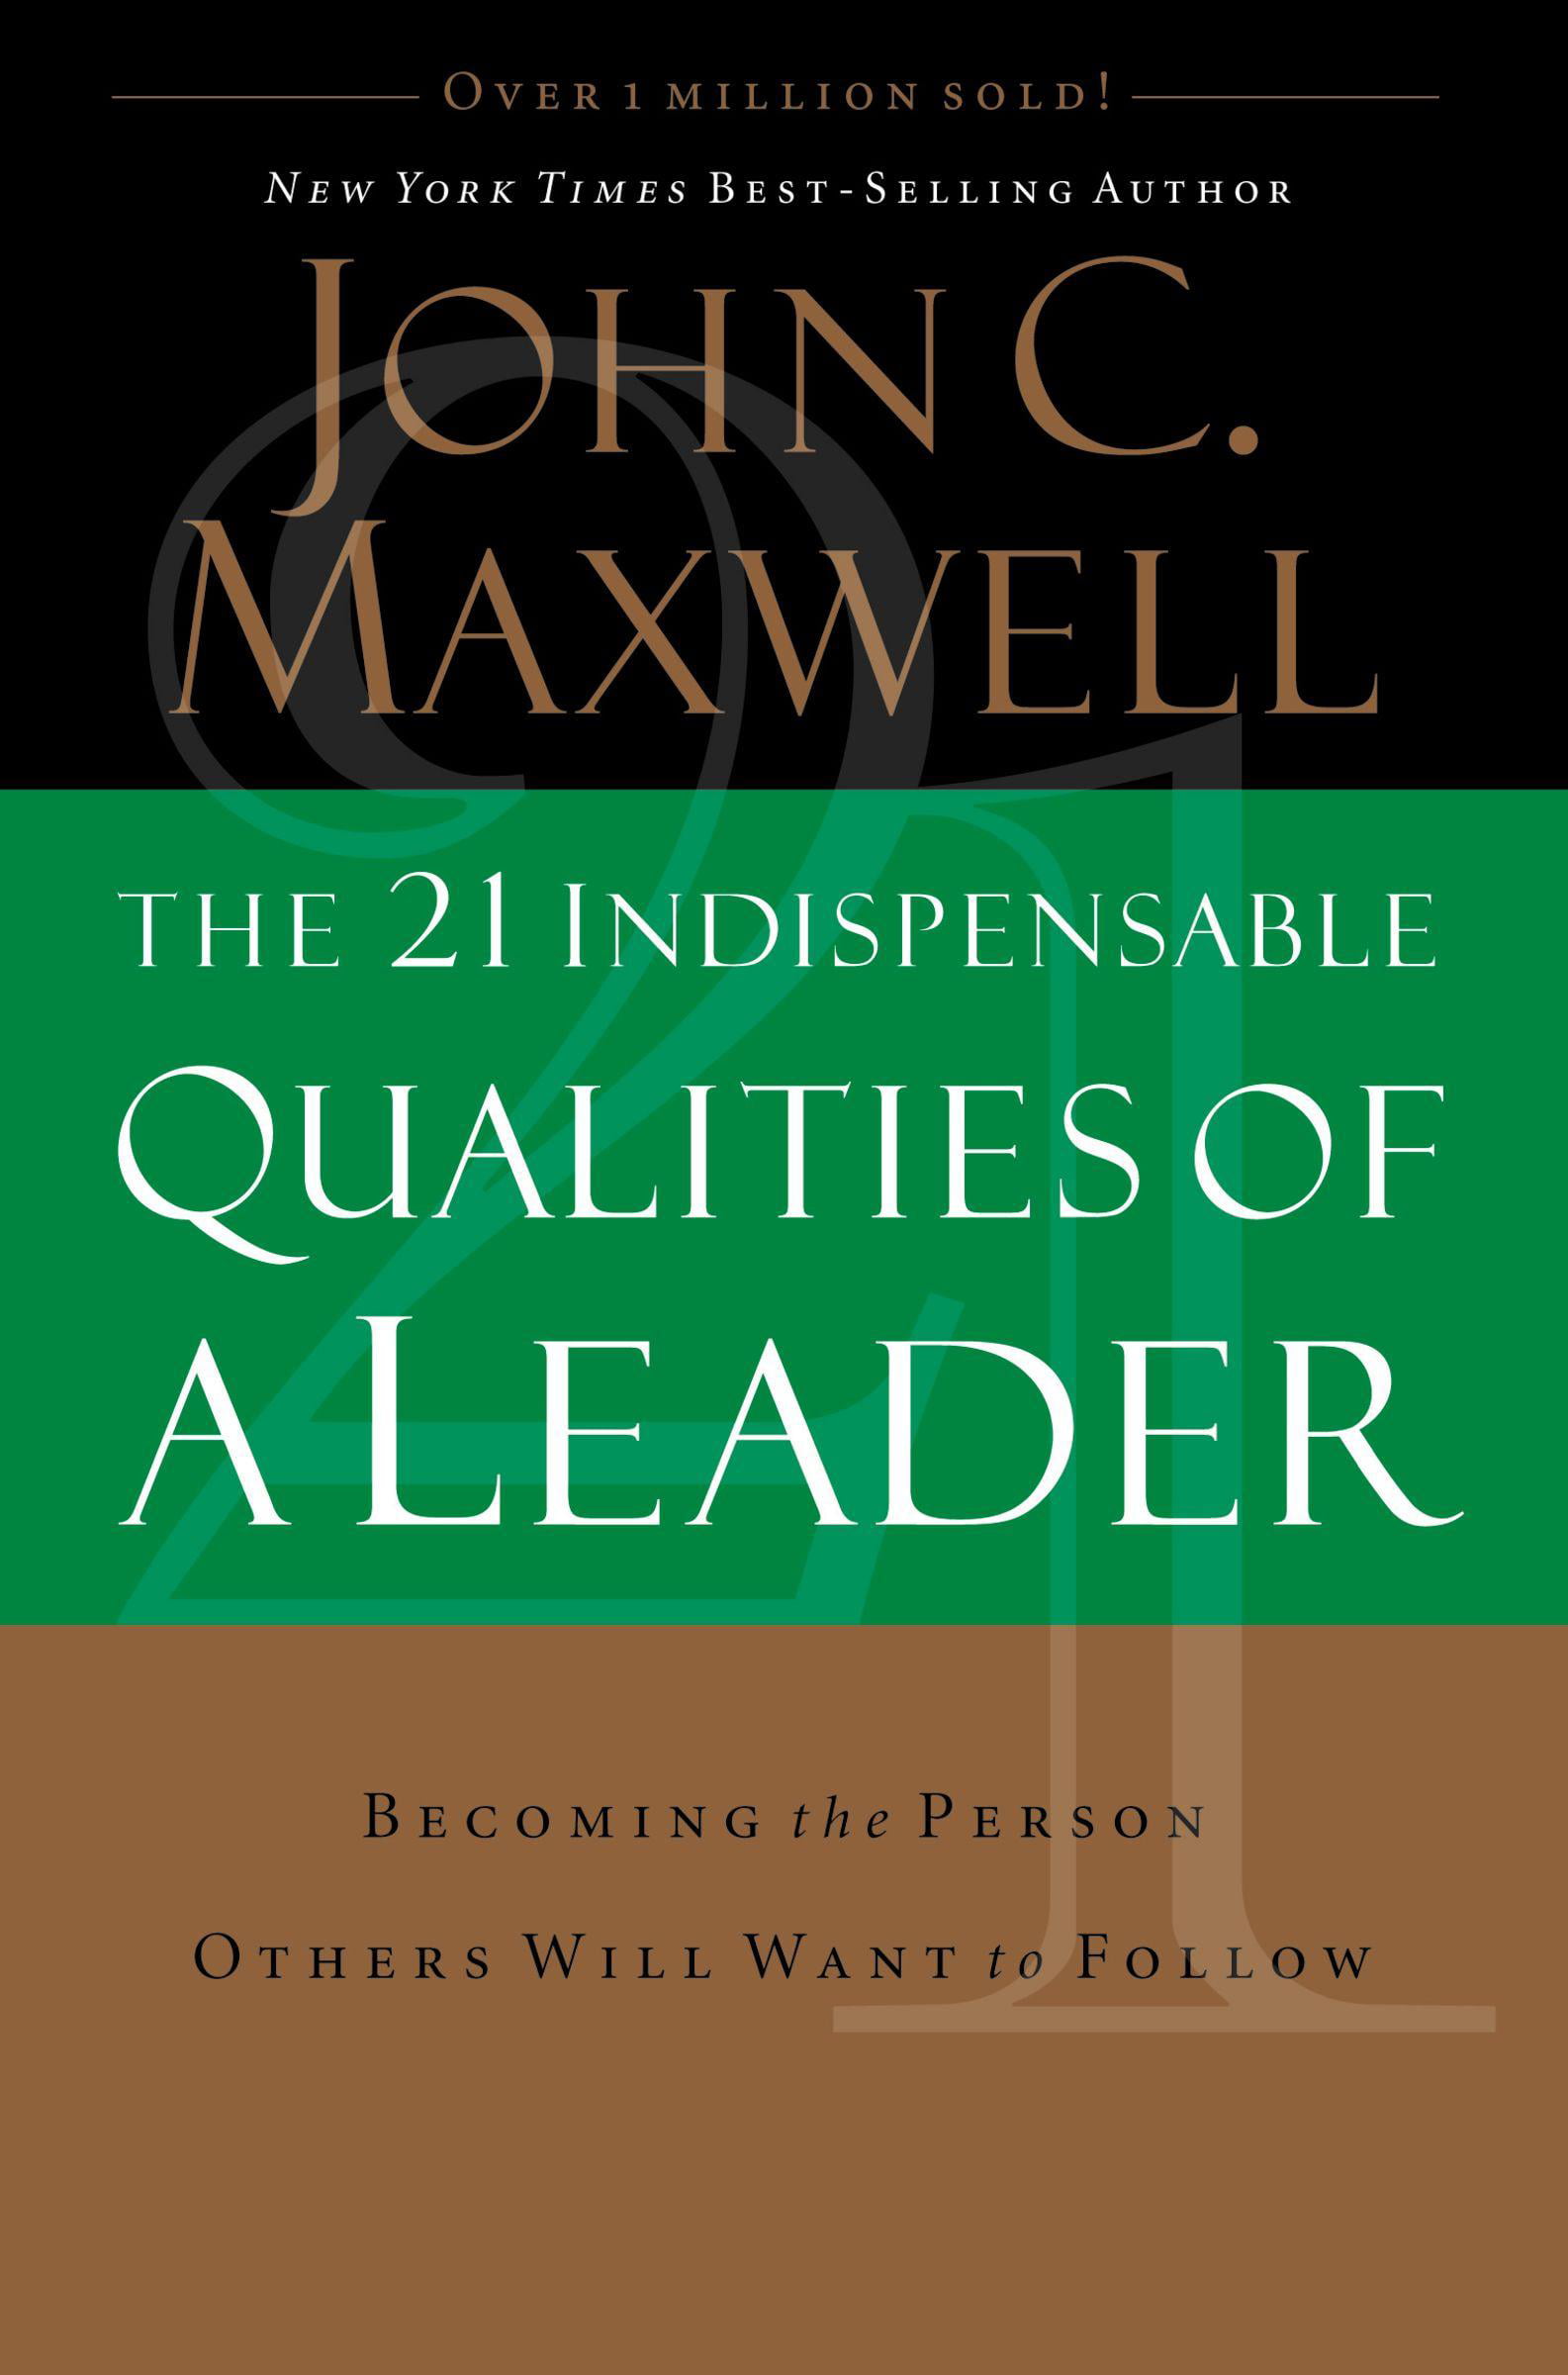 21 indispensable qualities of a leader essay